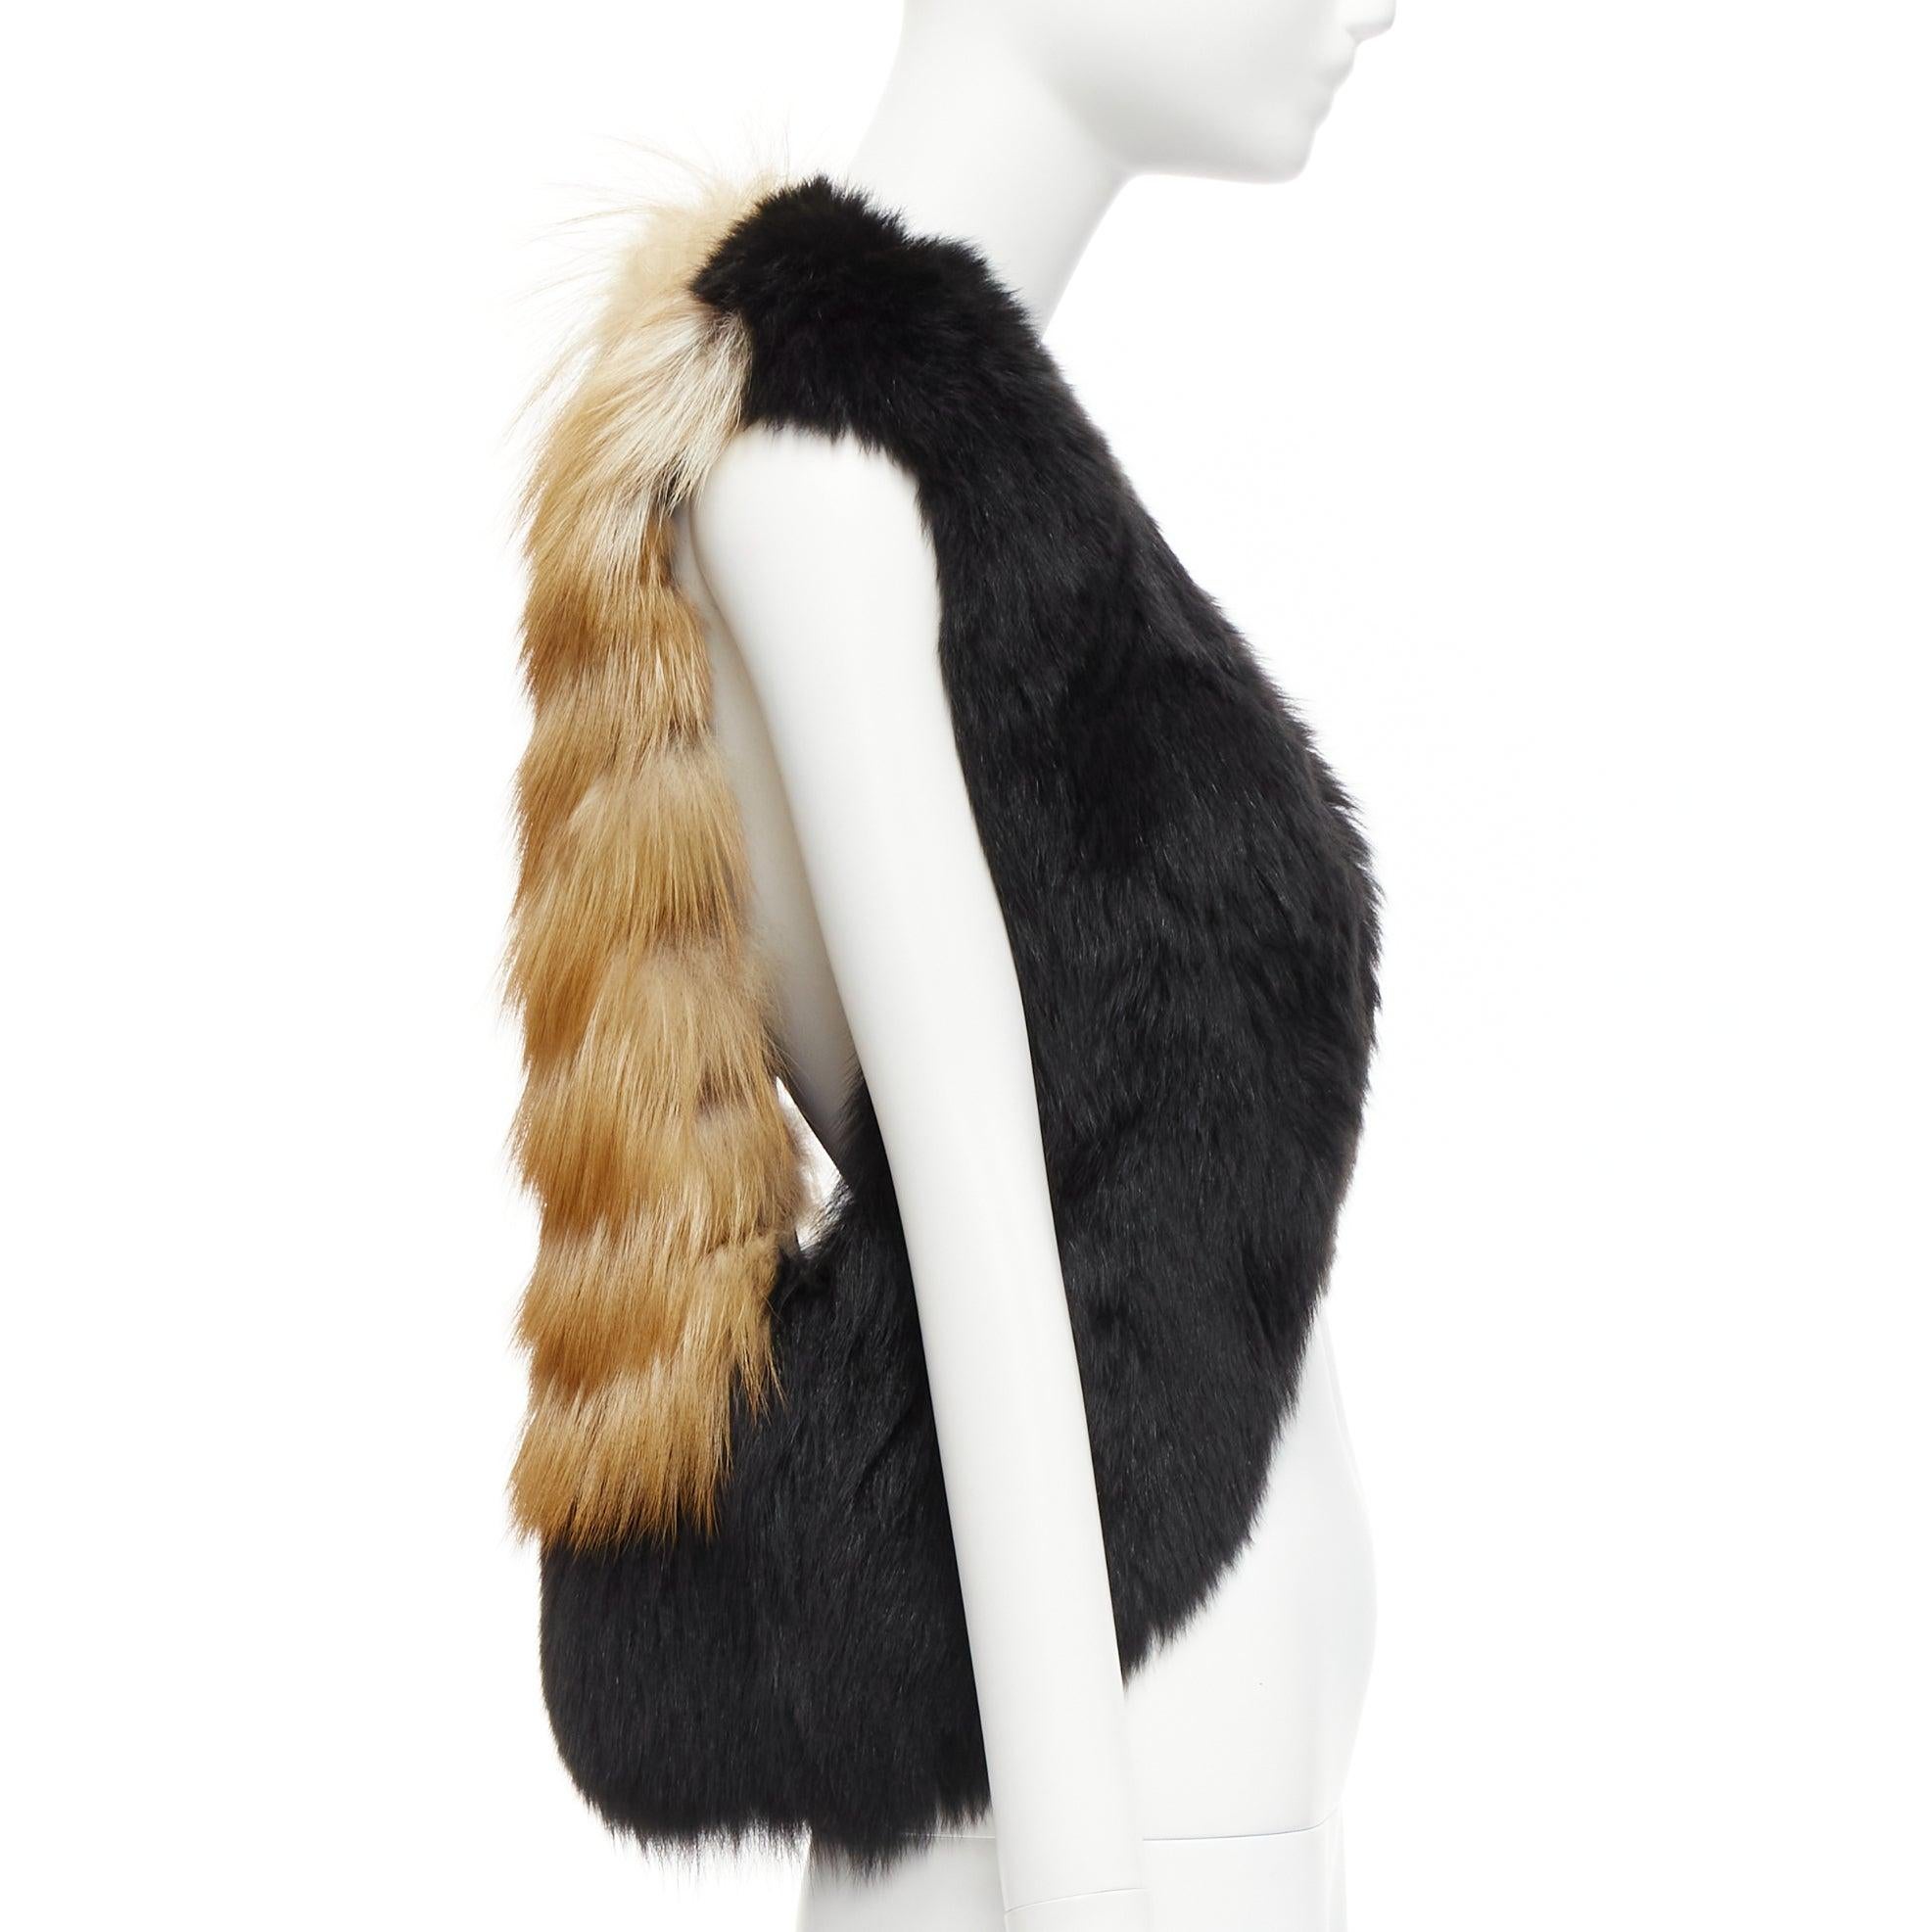 QUENTIN VERON black brown bicolor lamb fur bolero vest jacket FR36 S
Reference: NILI/A00010
Brand: Quentin Veron
Material: Fur
Color: Black, Brown
Pattern: Solid
Lining: Black Fabric
Made in: France

CONDITION:
Condition: Excellent, this item was